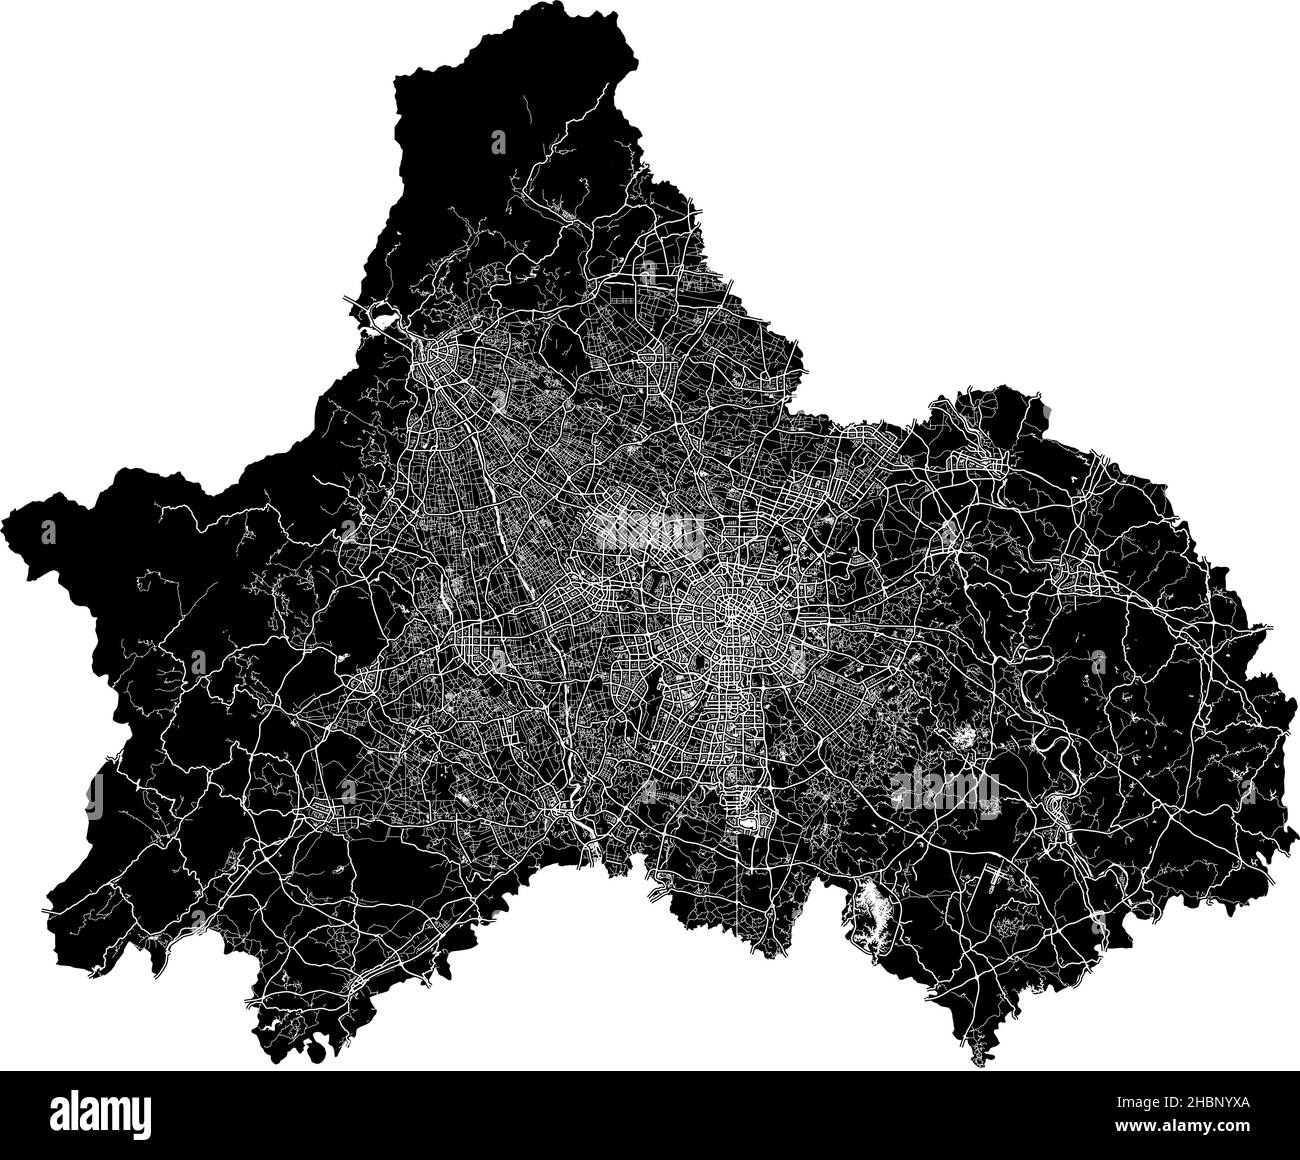 Chengdu, China, high resolution vector map with city boundaries, and editable paths. The city map was drawn with white areas and lines for main roads, Stock Vector